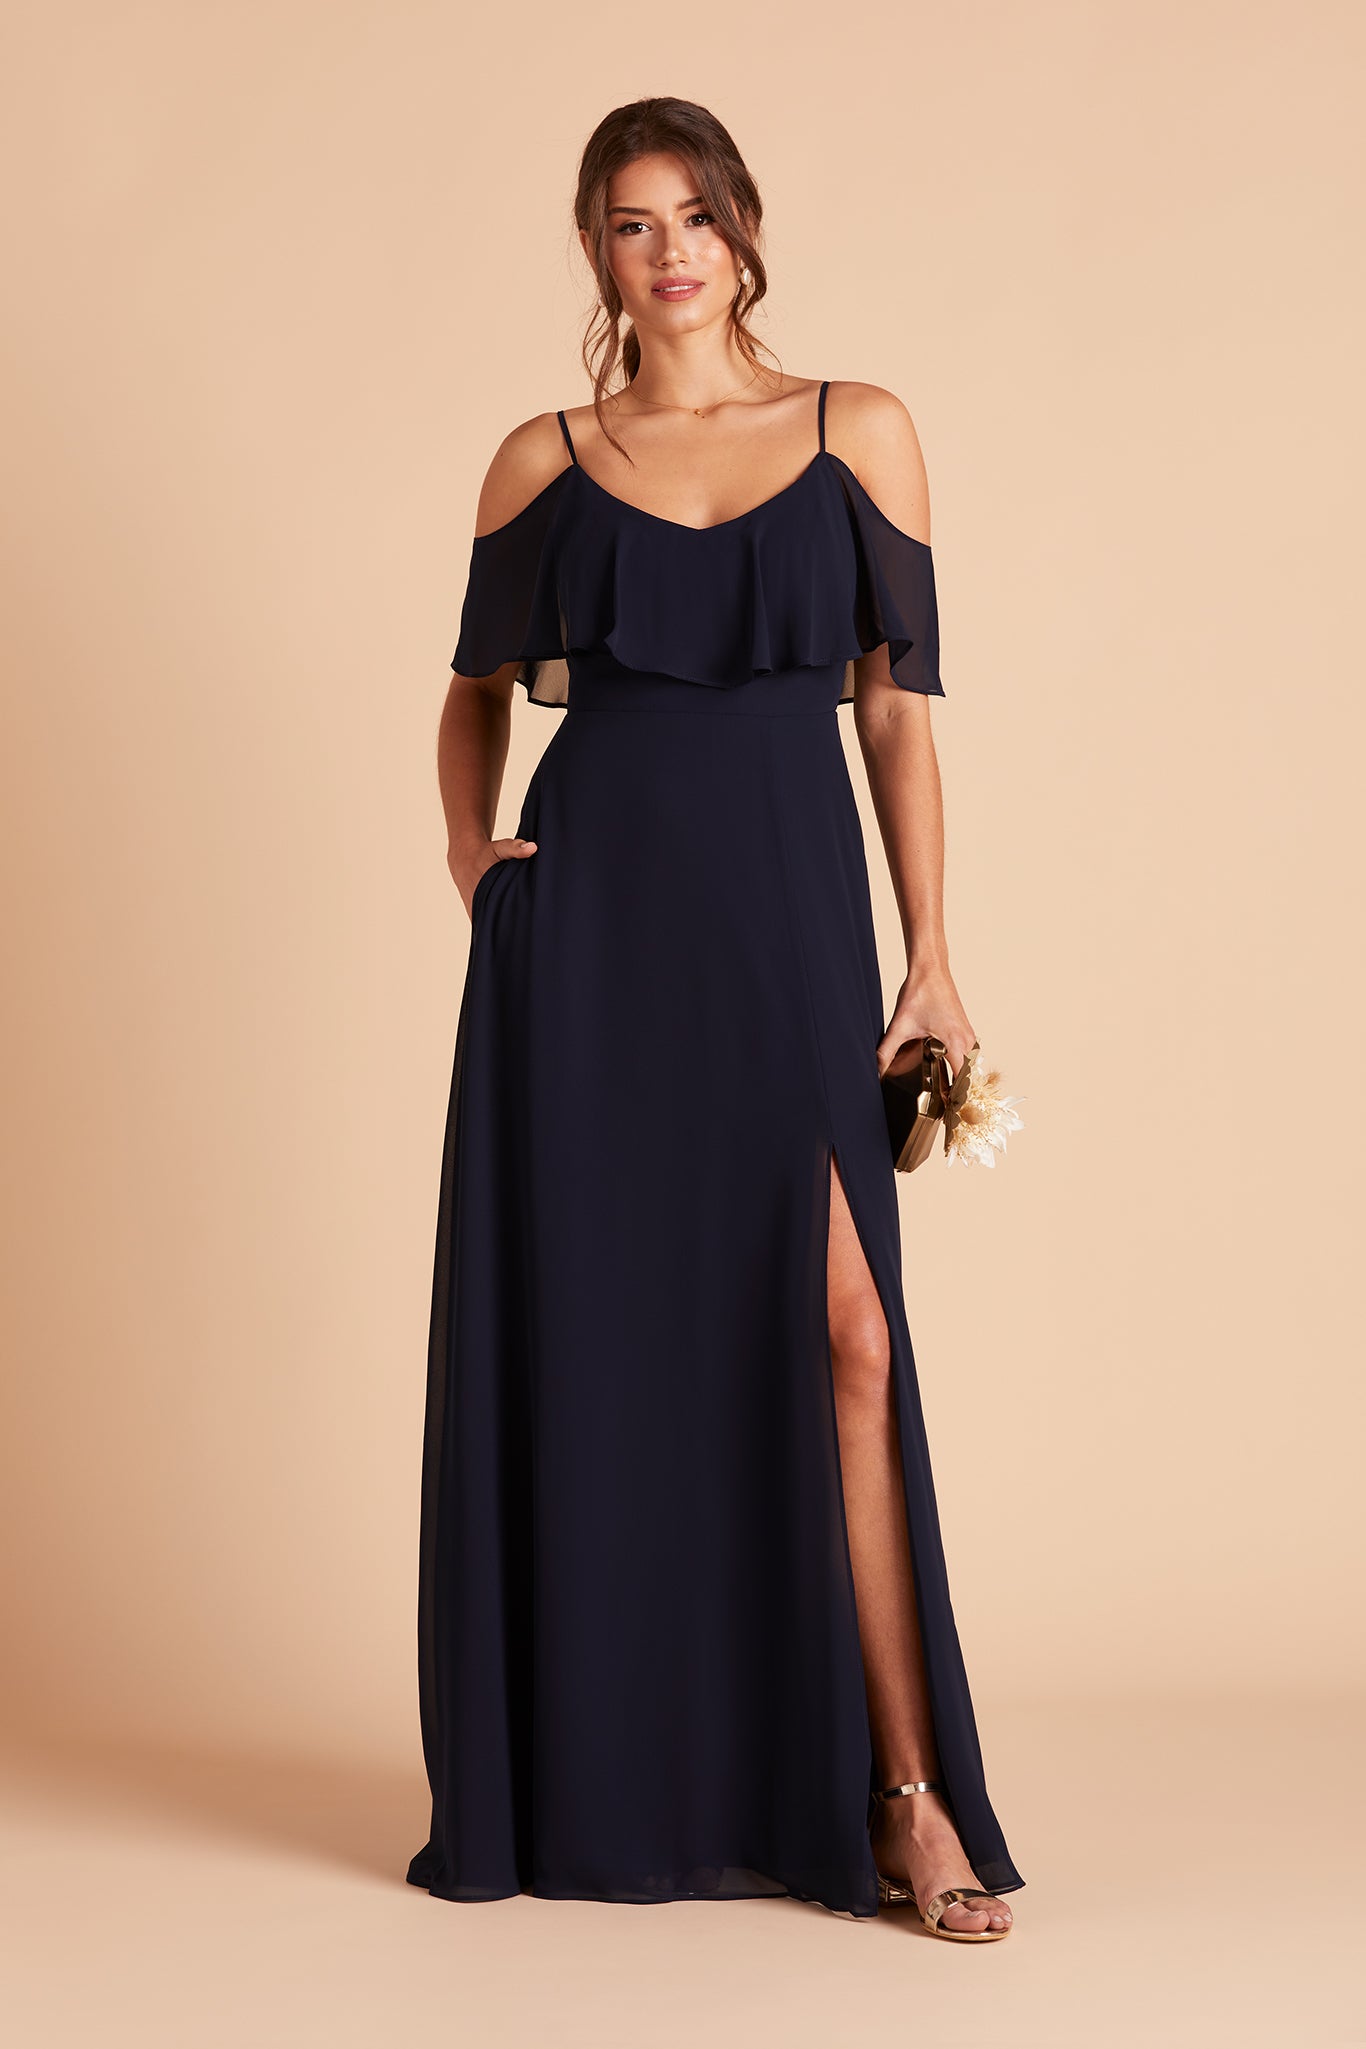 Jane convertible bridesmaid dress with slit in navy blue chiffon by Birdy Grey, front view with hand in pocket